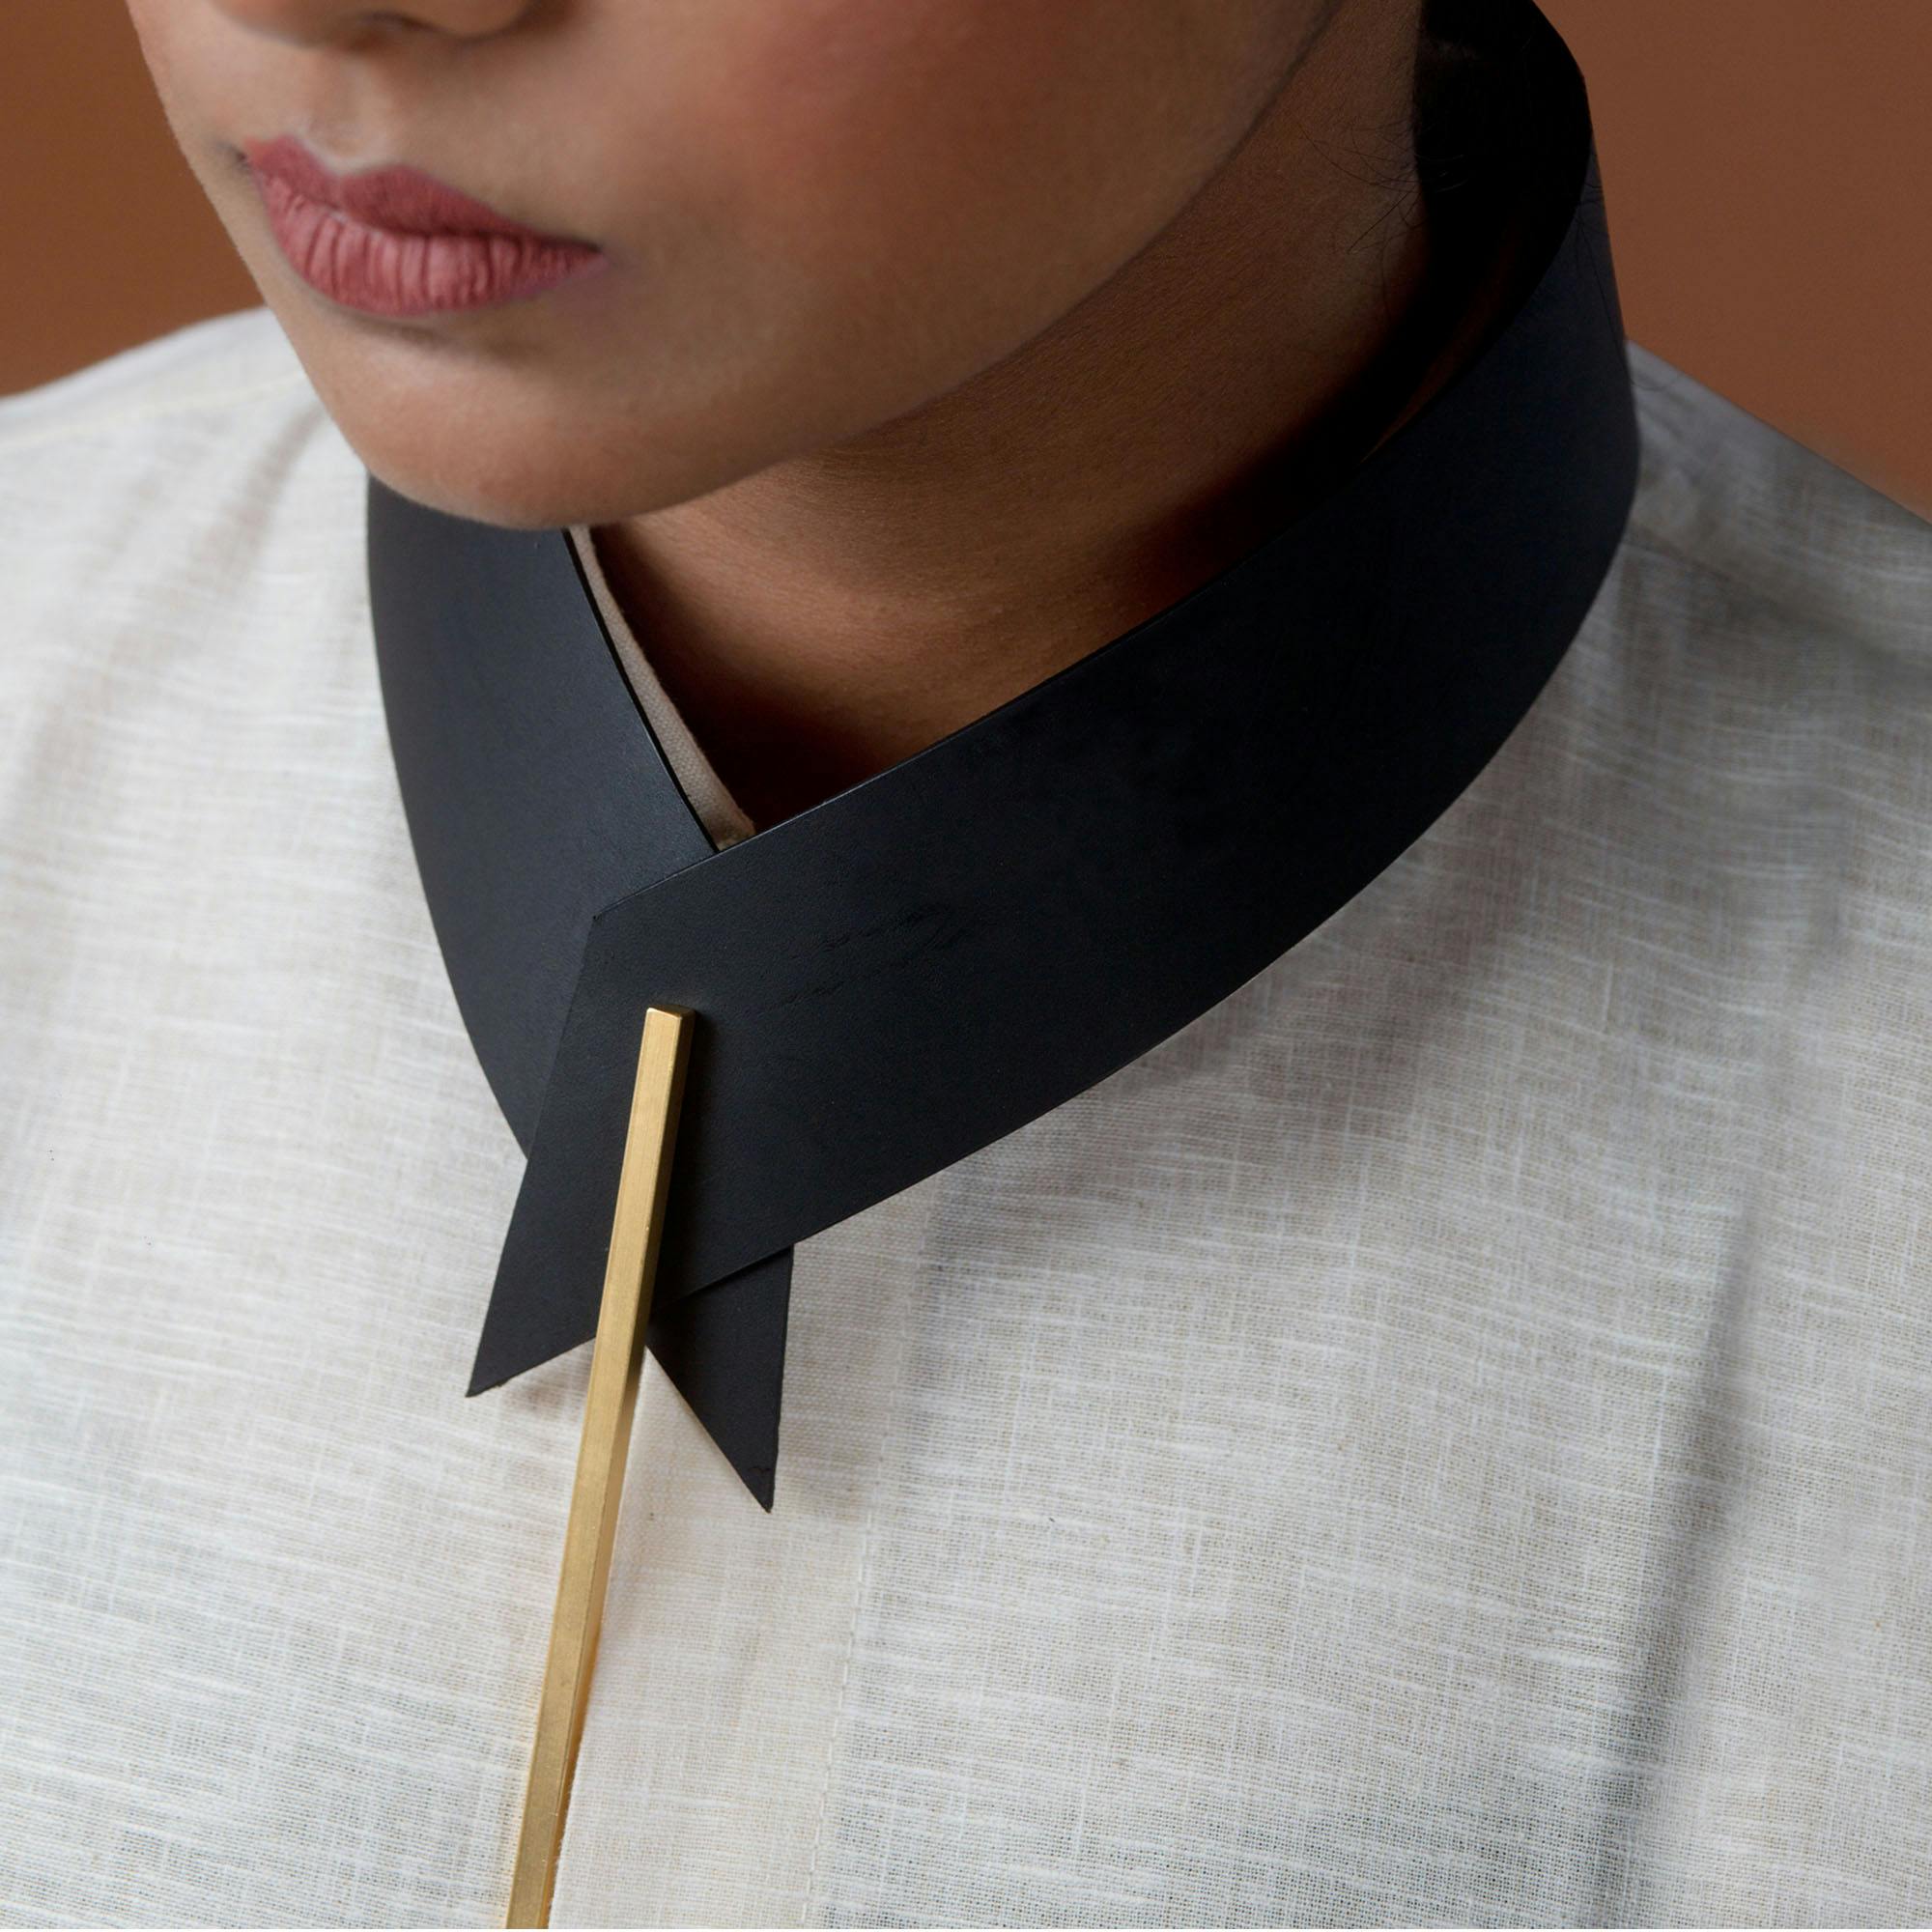 Kane & Abel Neck Collar, a product by NO NA MÉ